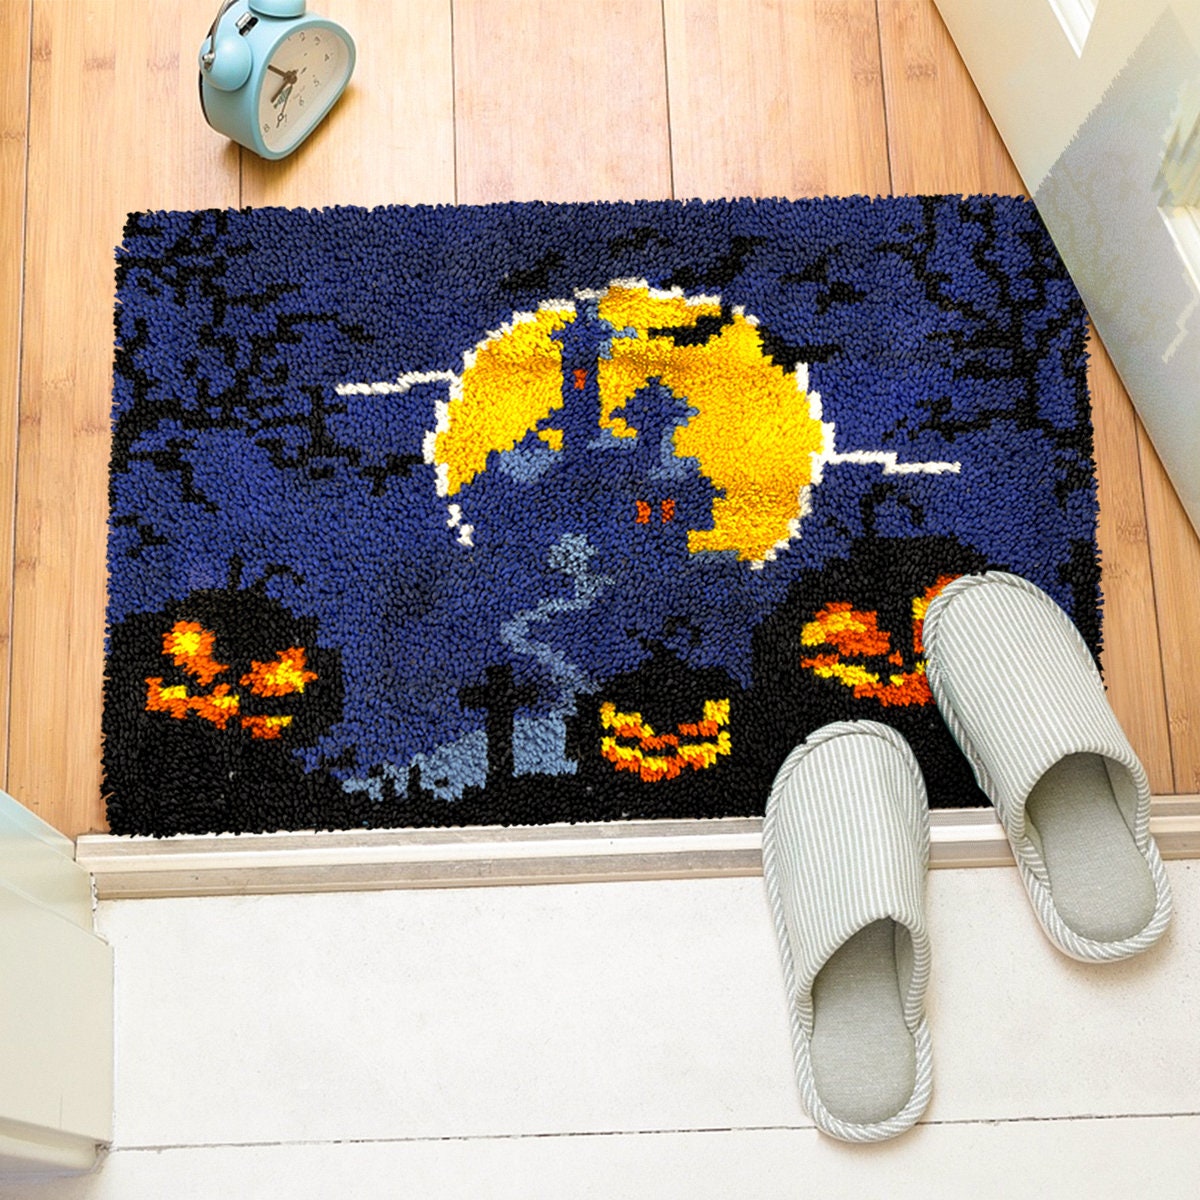 Latch Hook Kits for Adults/Kids Crocheting Rug Pre-Printed Canvas Halloween  Pattern Embroidery Tapestry Needlework Home Decor 20.5 X 15